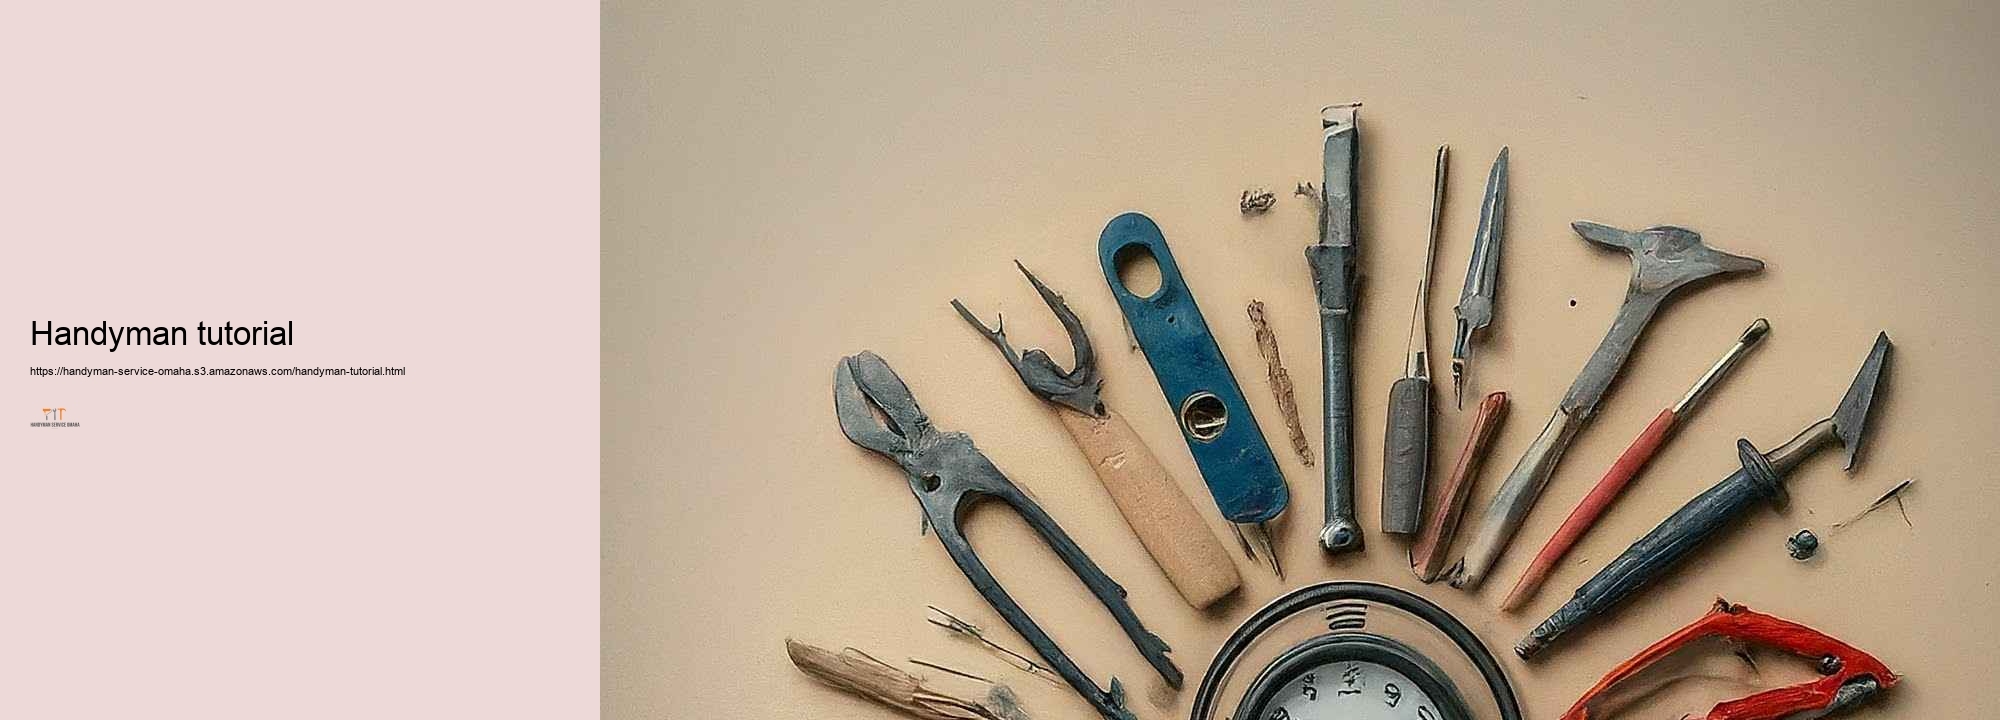 Comprehensive Handyman Providers for each Need in Omaha